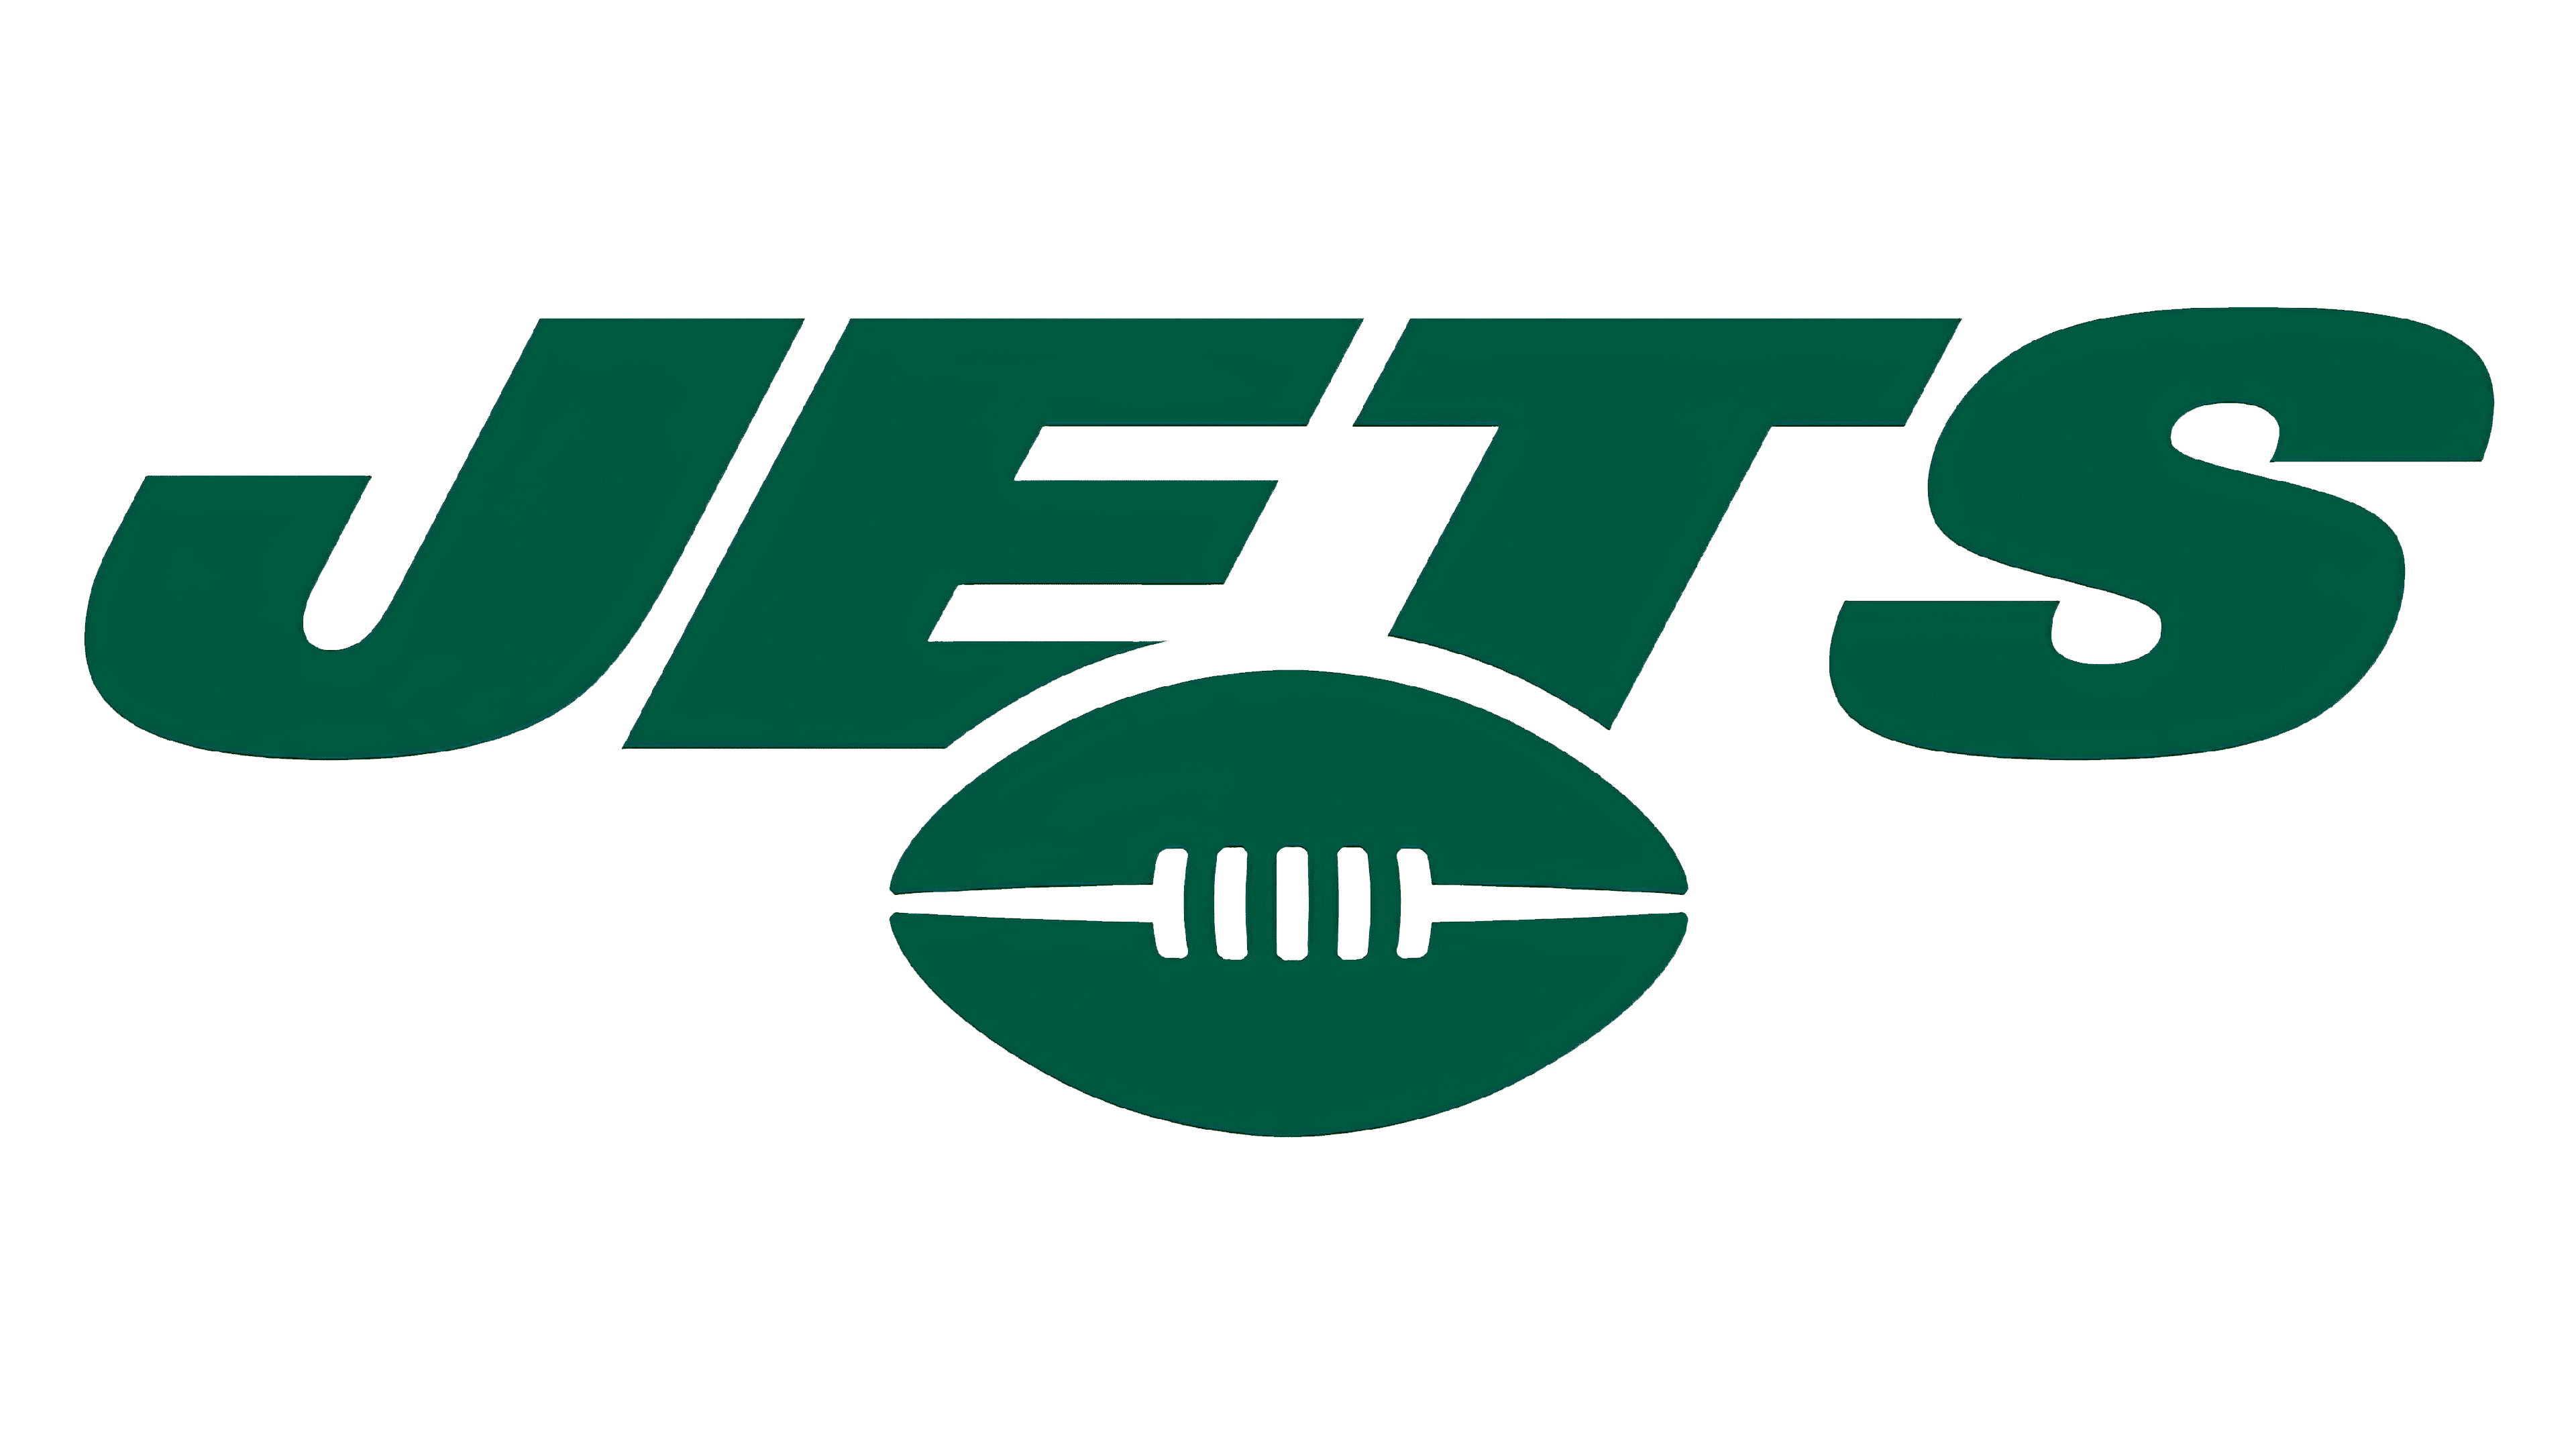 Logos and uniforms of the New York Jets - Wikipedia